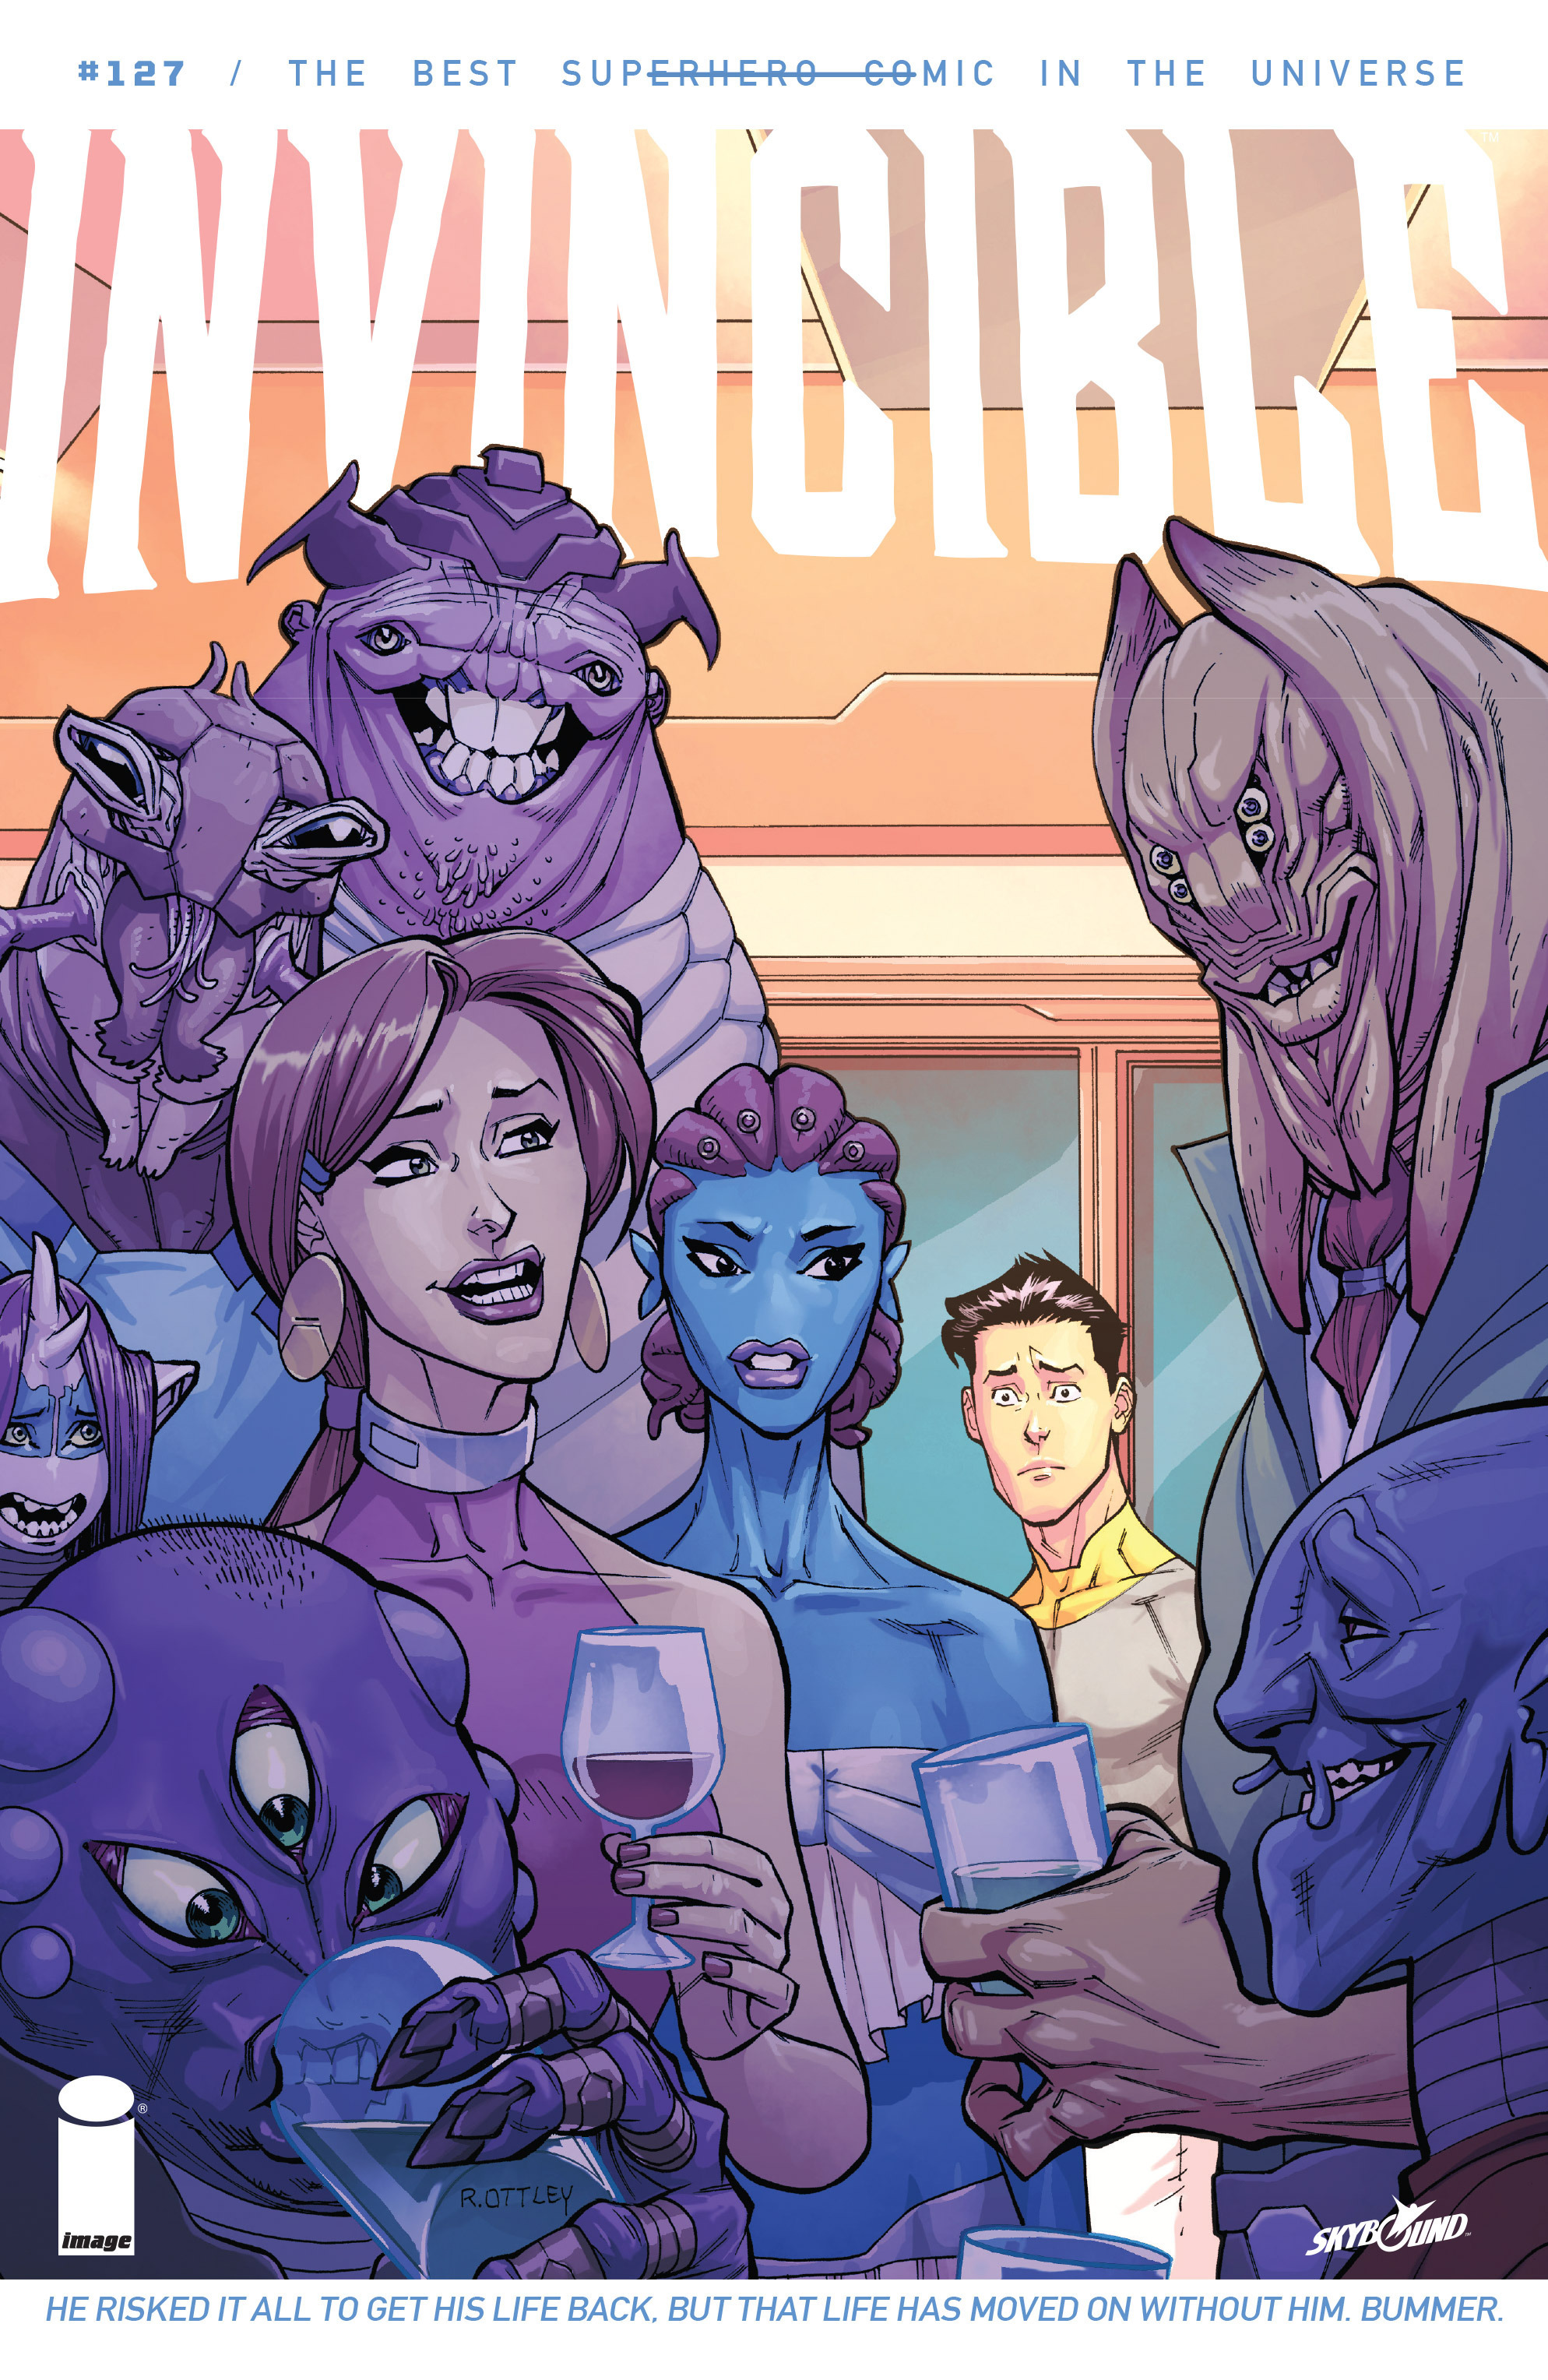 Read online Invincible comic -  Issue #127 - 1